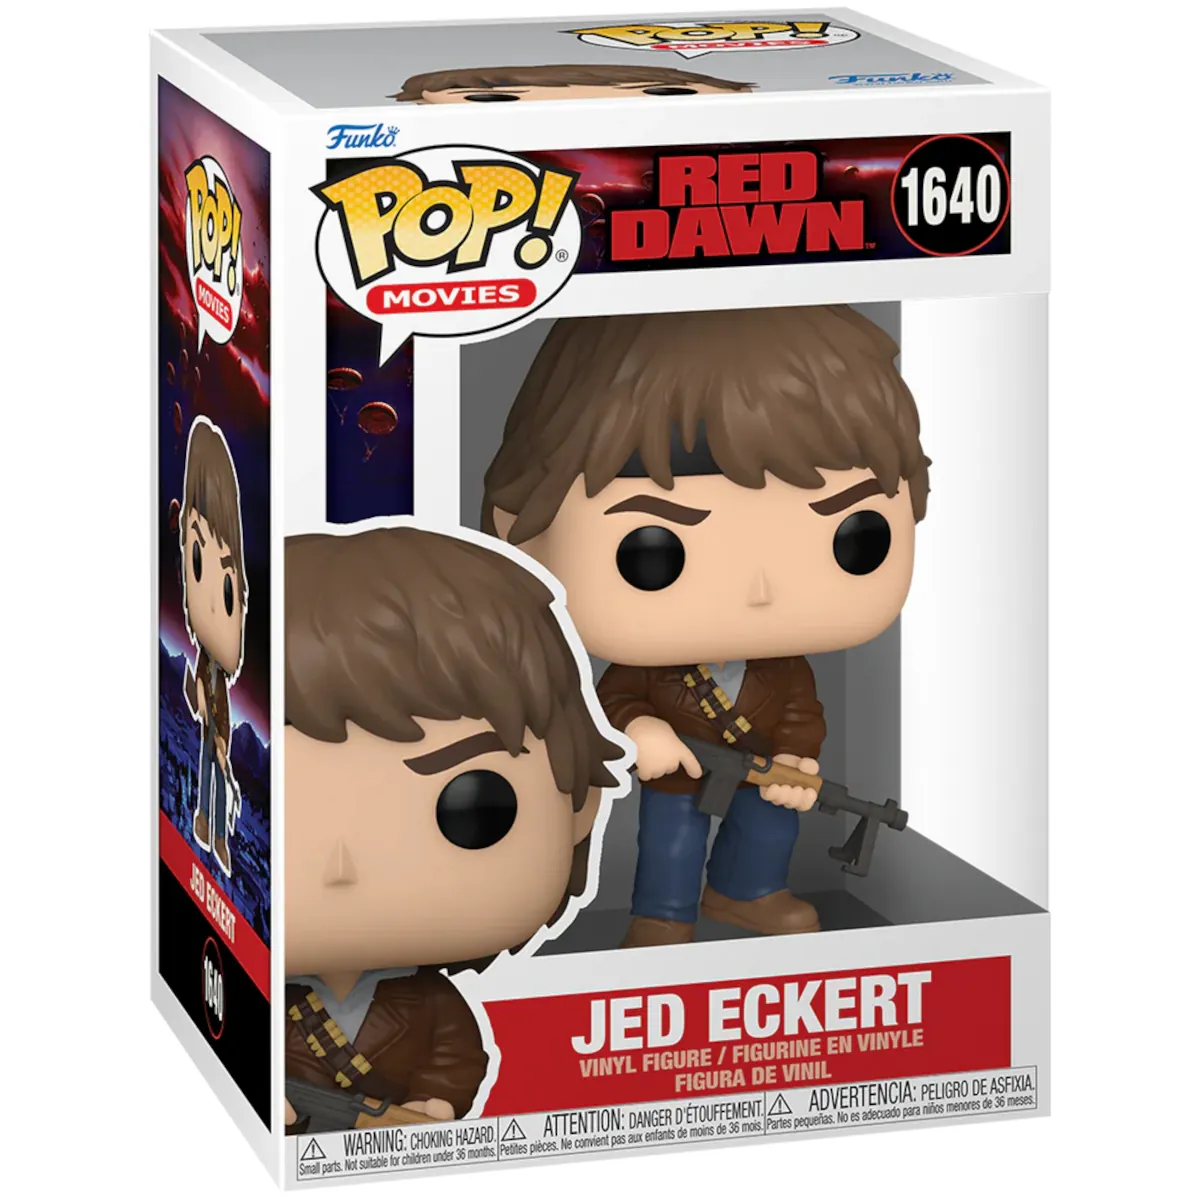 81170 Funko Pop! Movies - Red Dawn - Jed Eckert Collectable Vinyl Figure Box Front